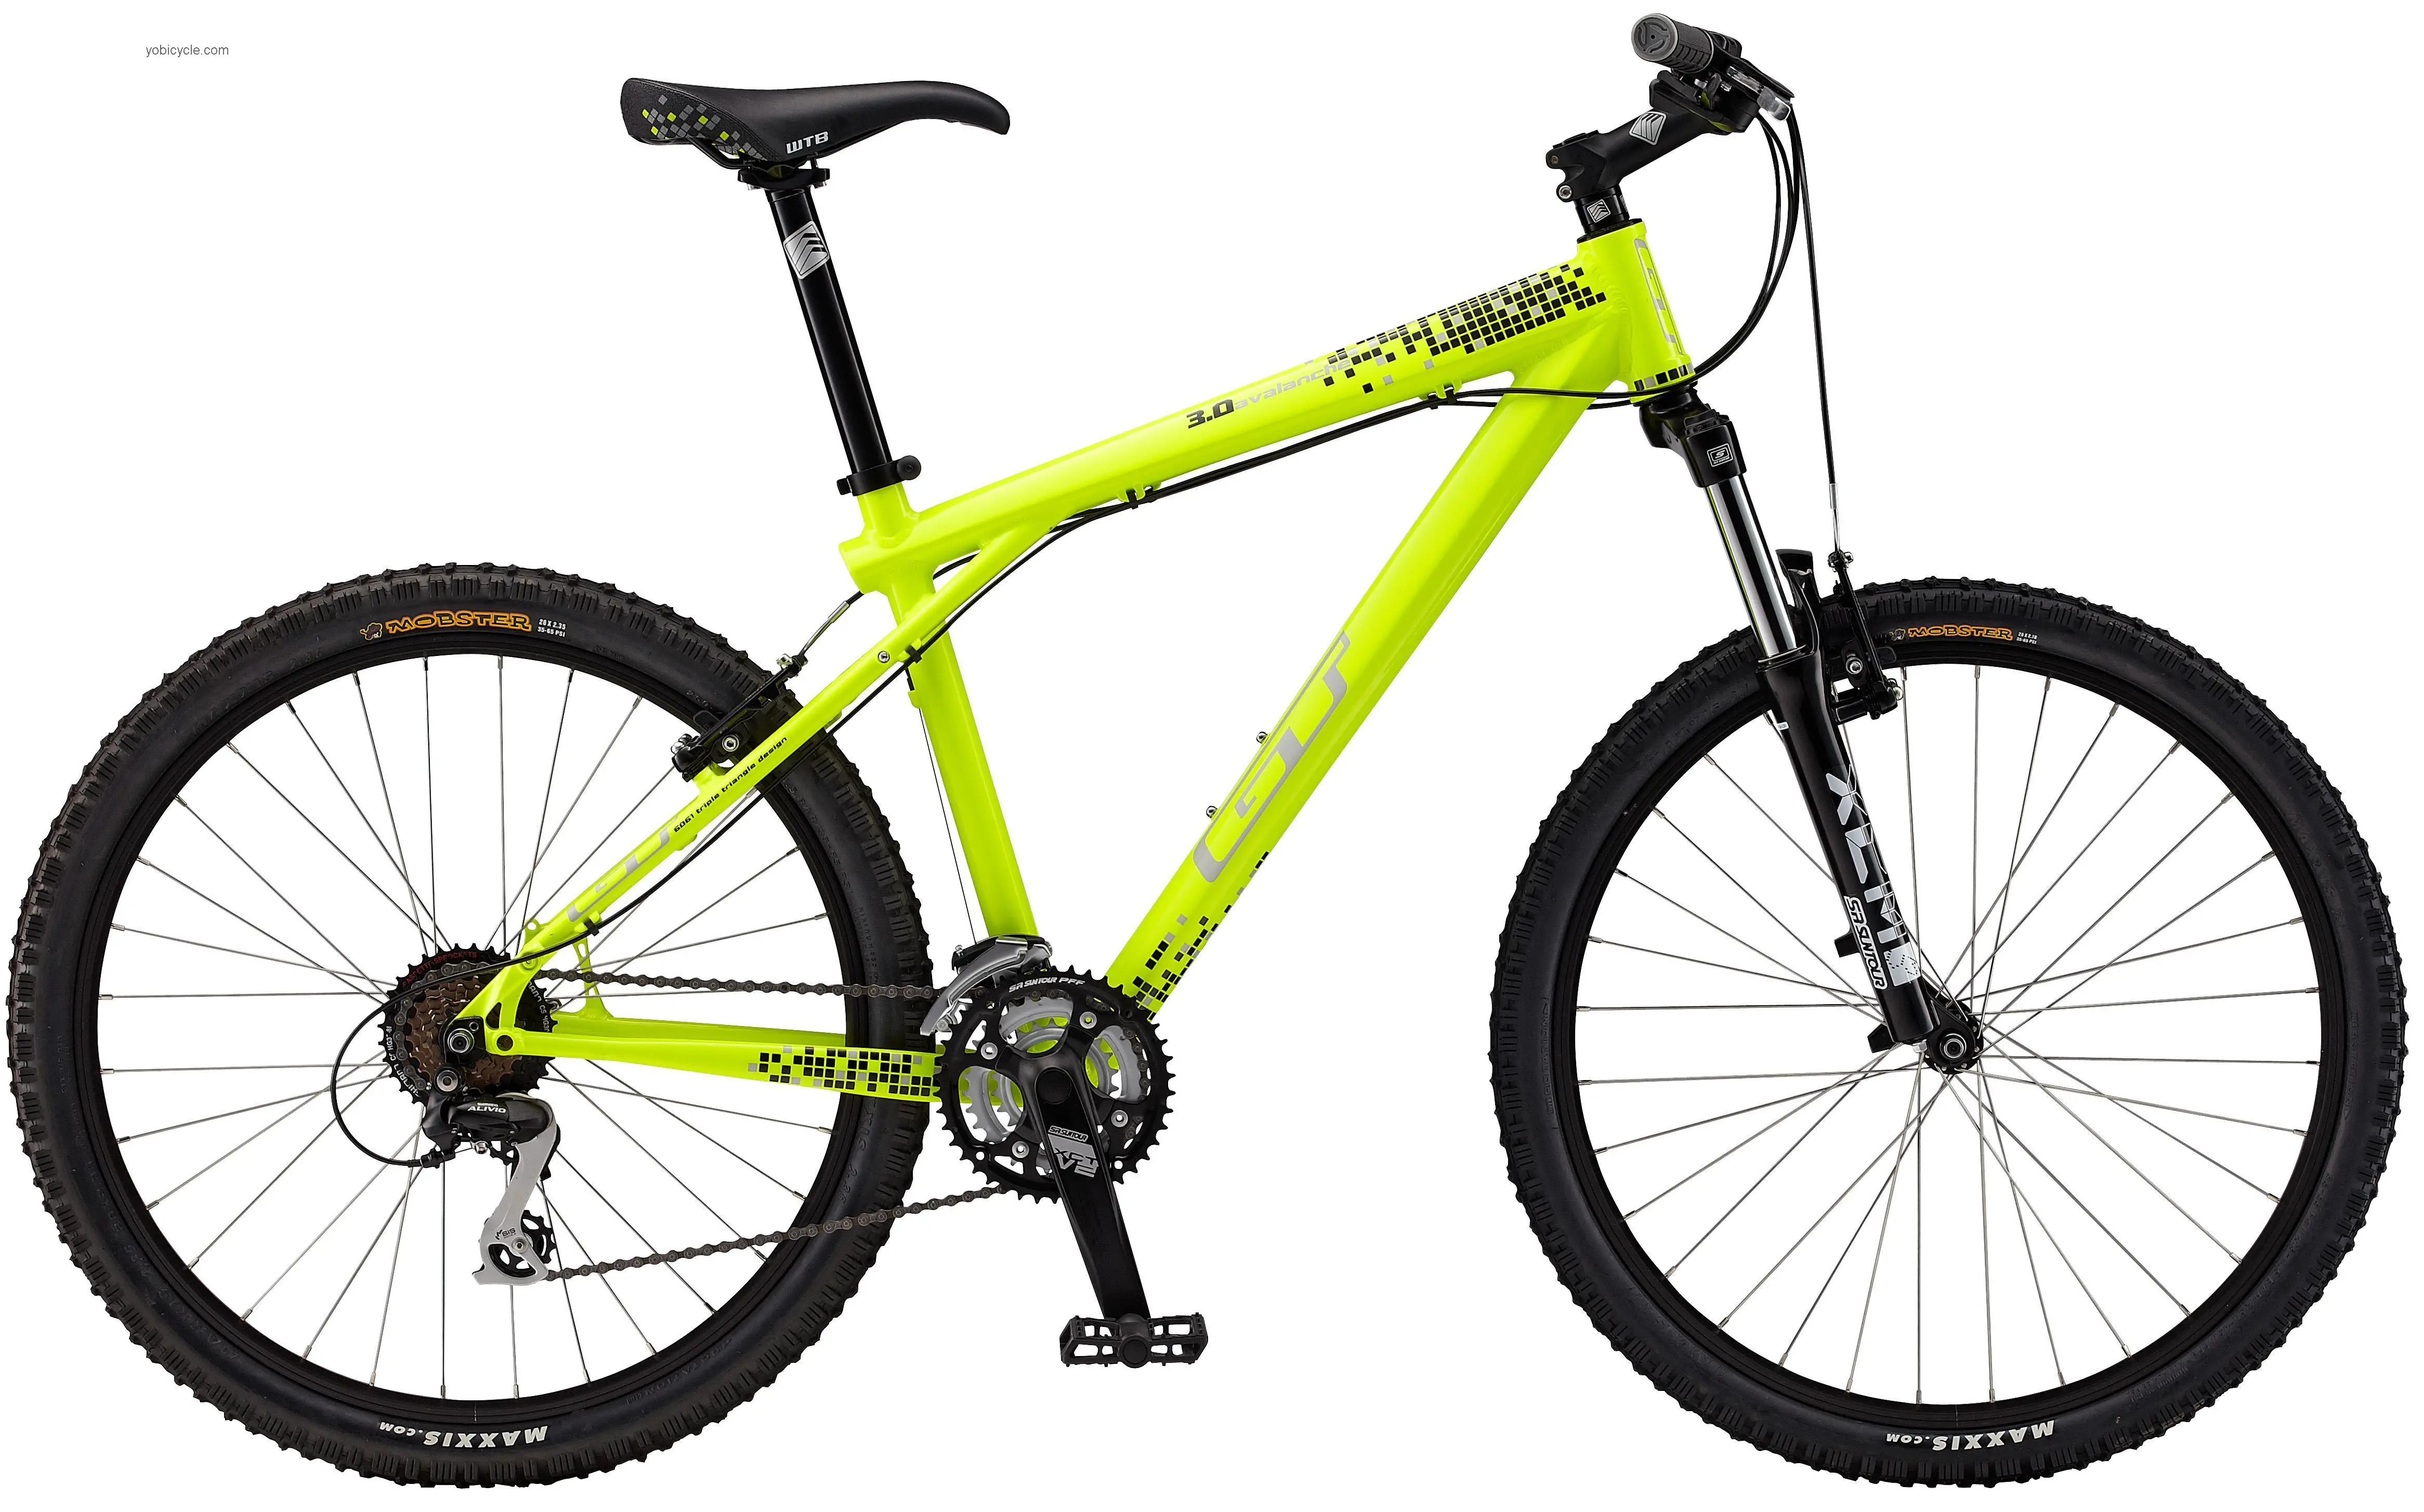 GT Avalanche 3.0 2011 comparison online with competitors